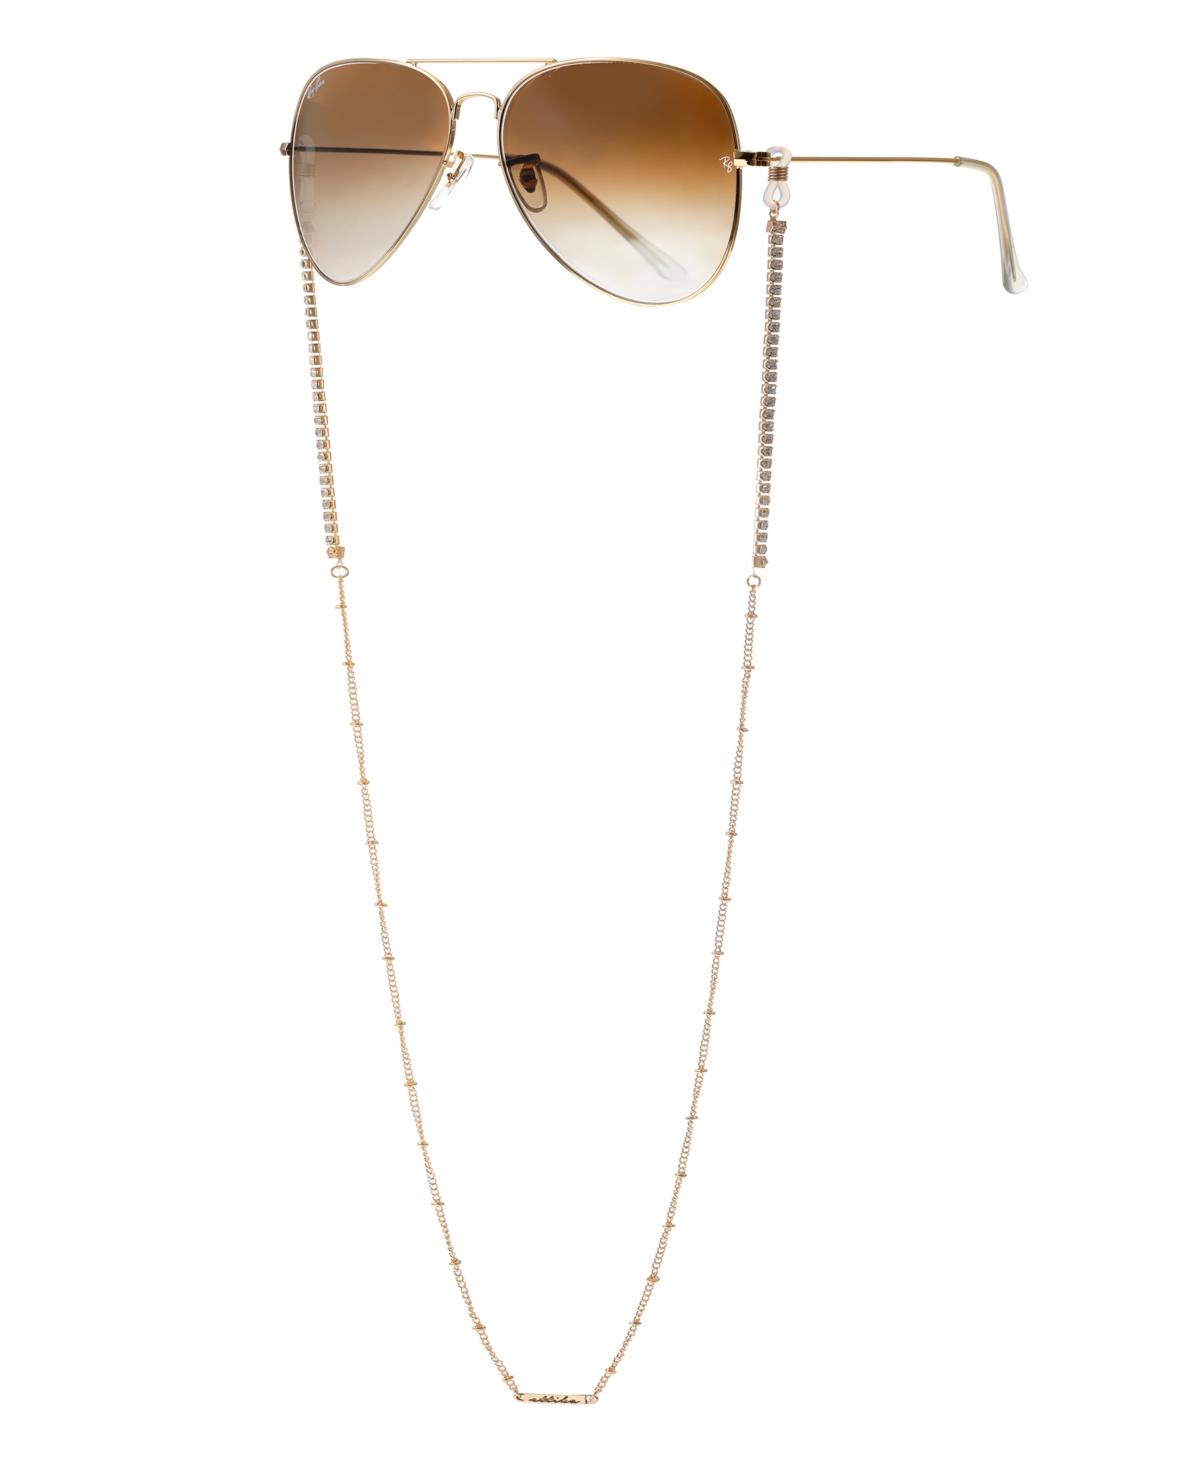 Women's 18k Gold Plated Crystal Shores Glasses Chain - Gold-Plated